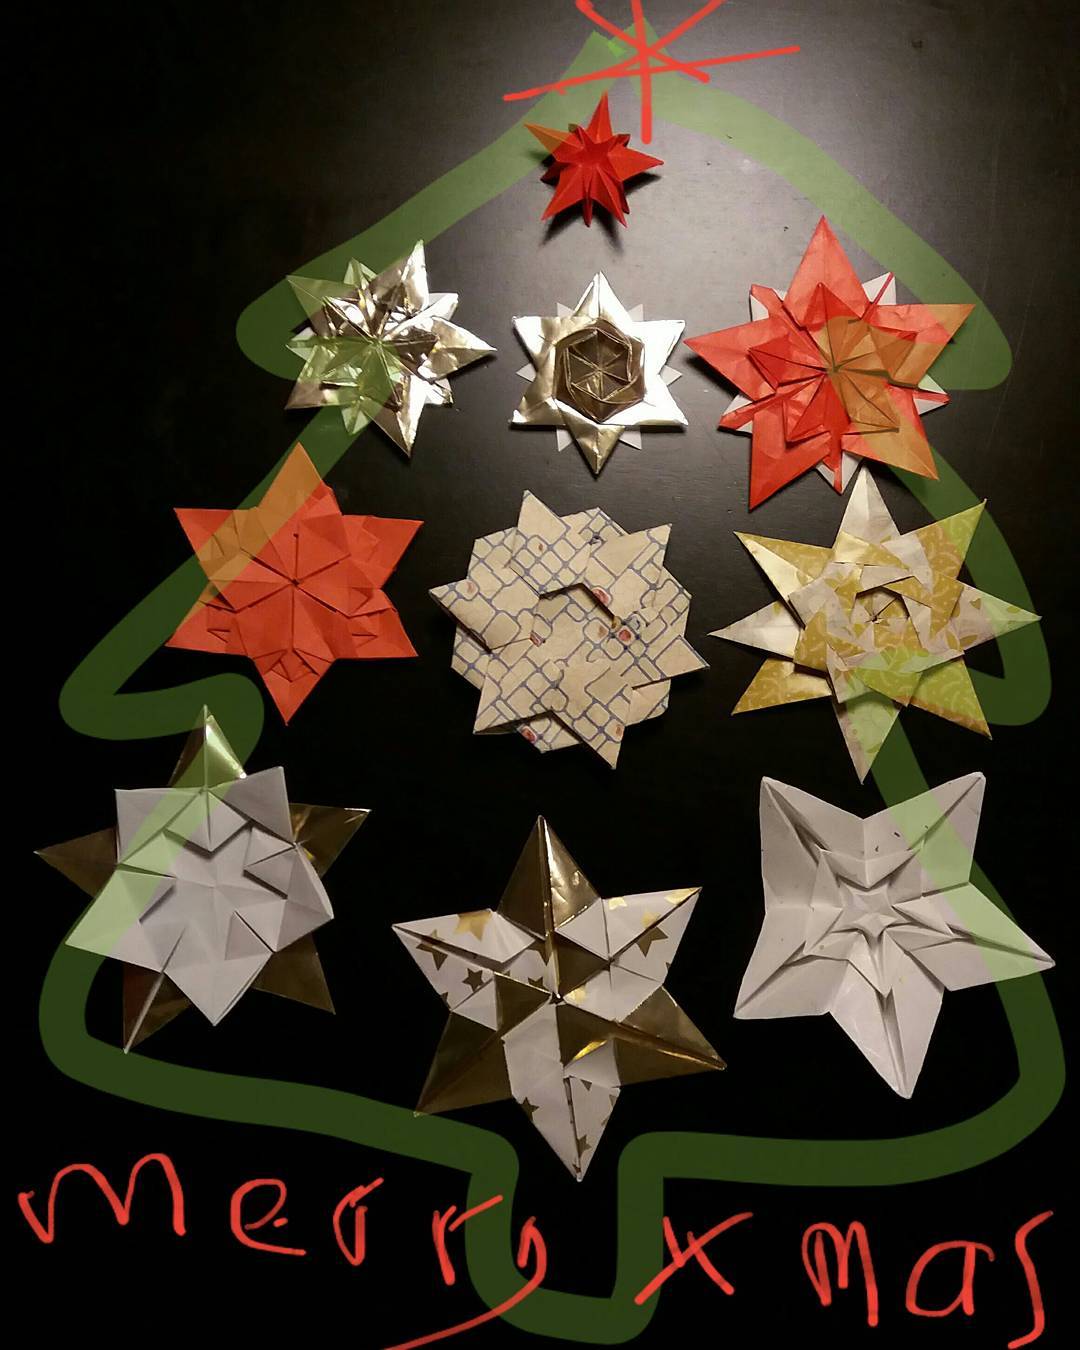 Wonderful quite some difficult Christmas origami! Have a peaceful and joyful day!